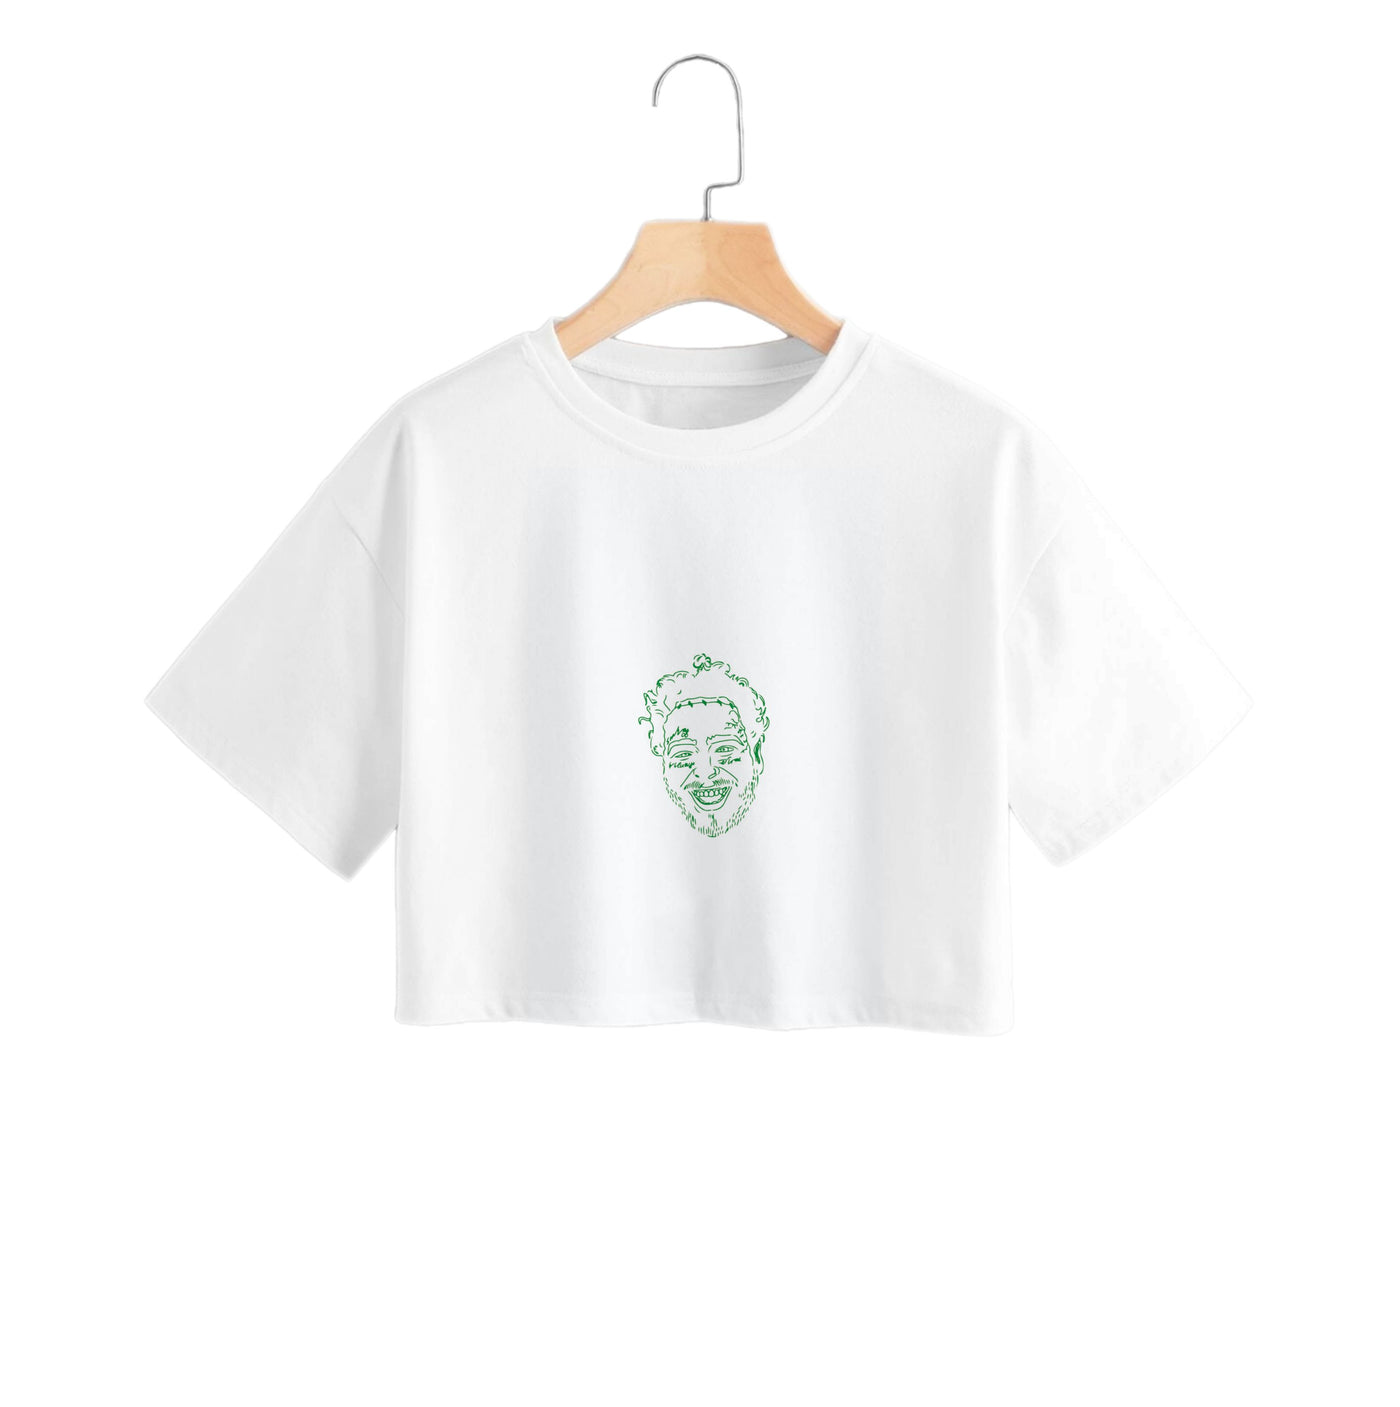 Outline - Post Malone Crop Top